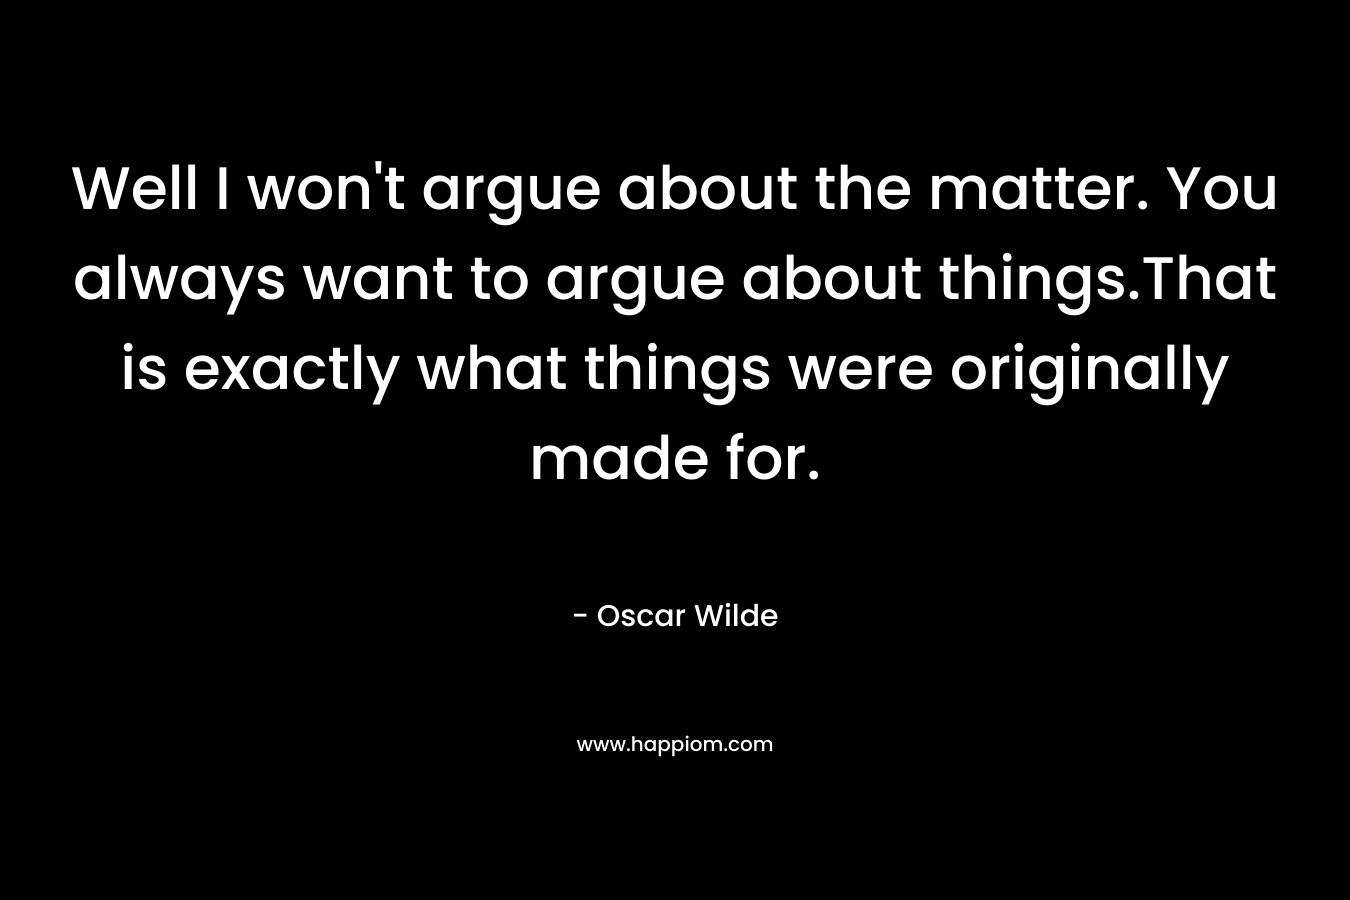 Well I won't argue about the matter. You always want to argue about things.That is exactly what things were originally made for.